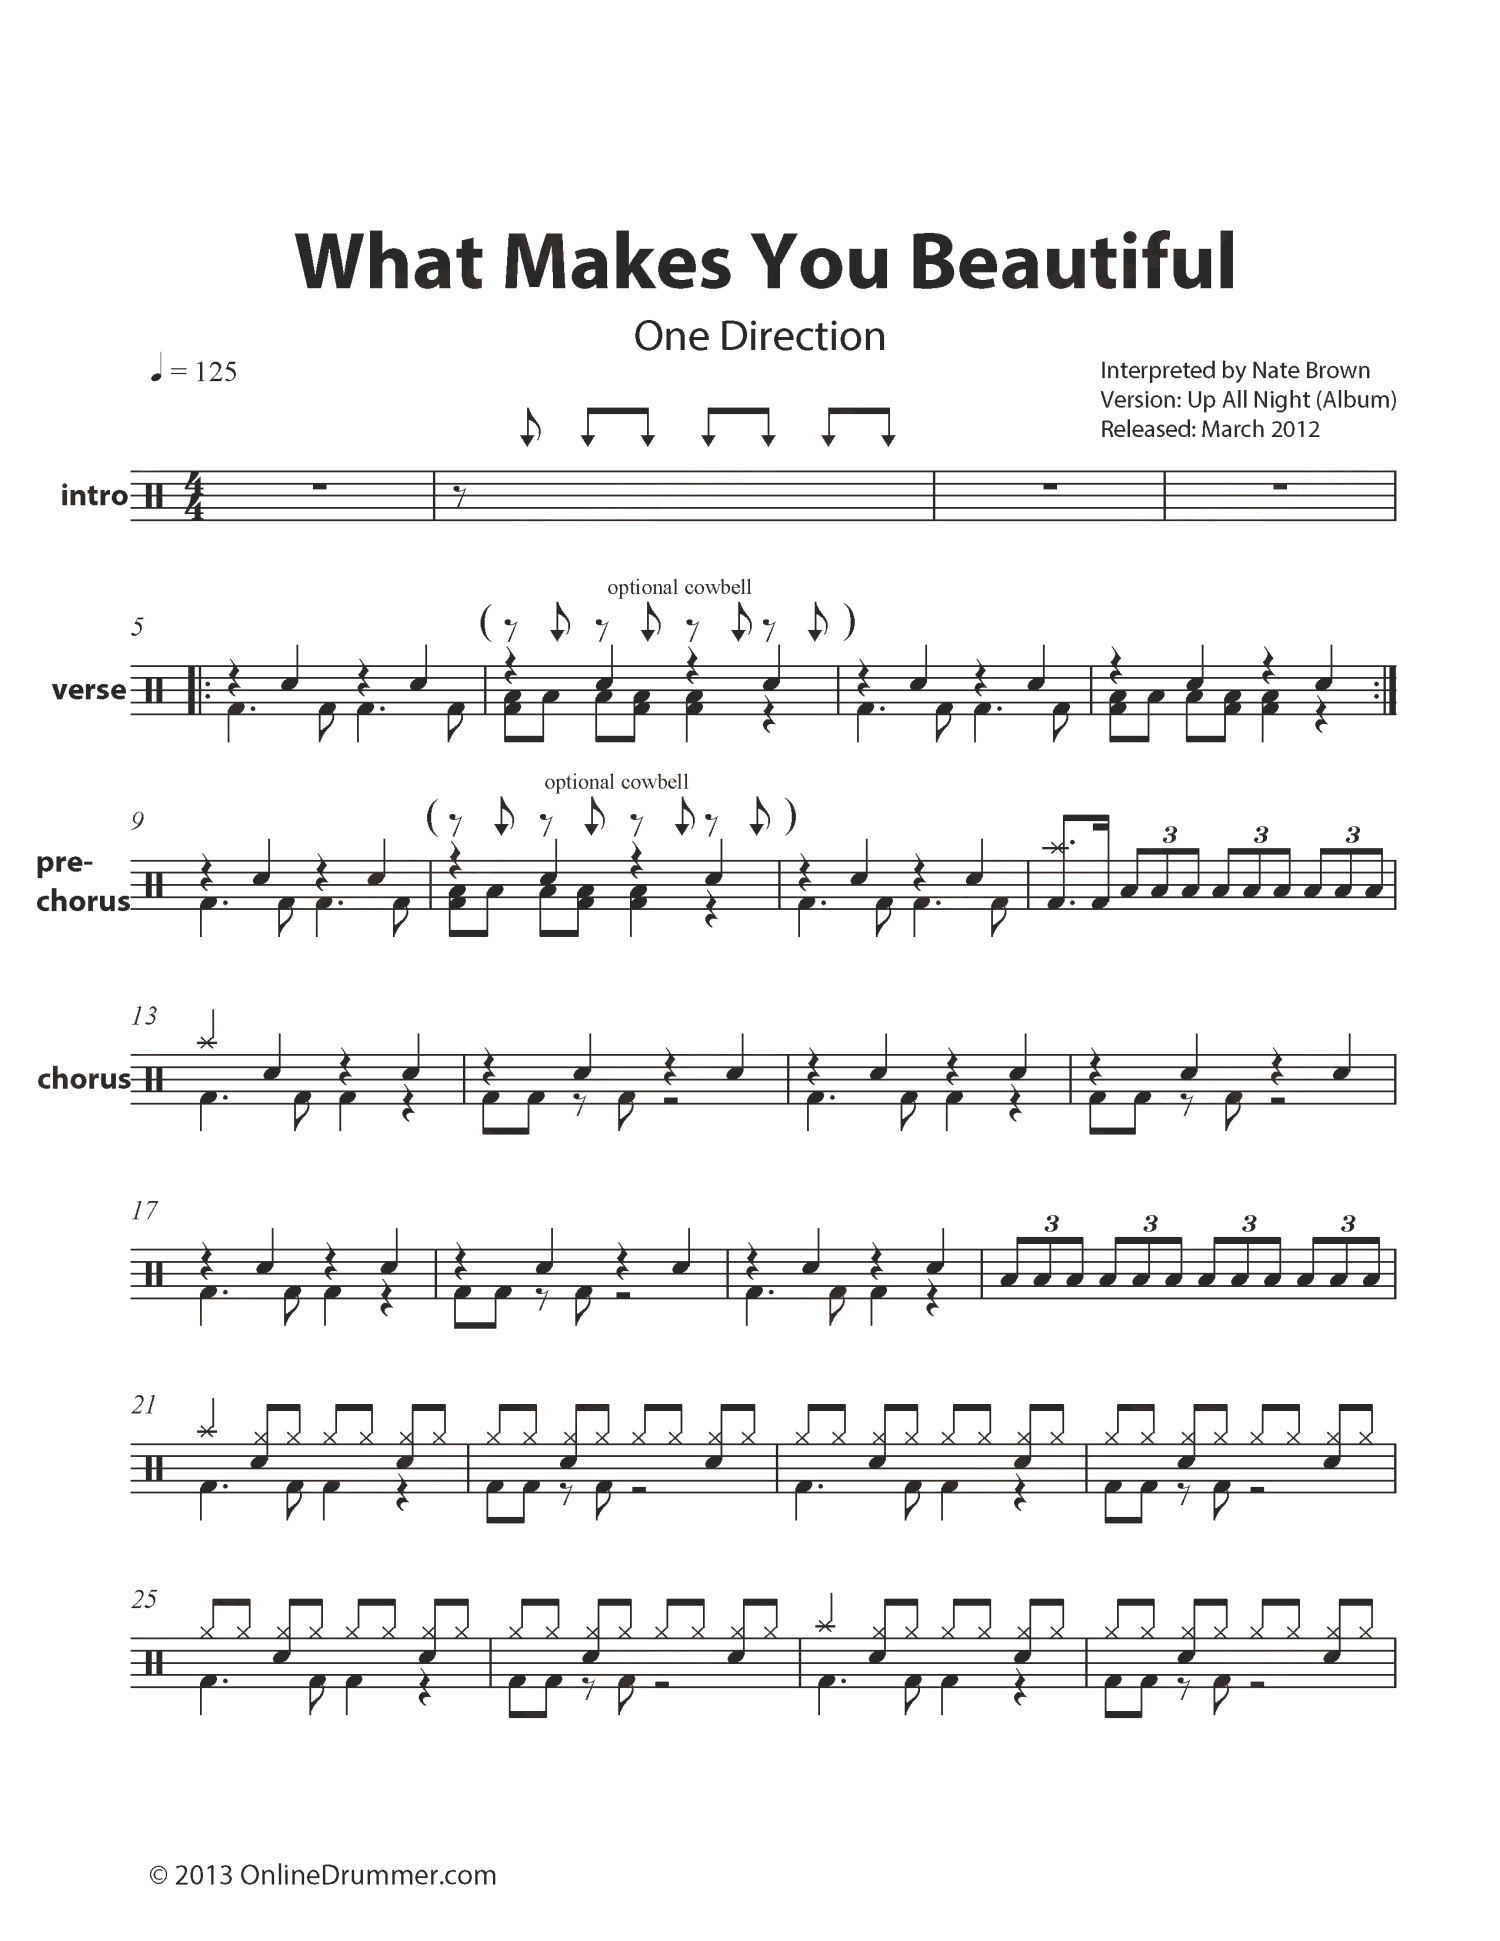 One Direction《What Makes You Beautiful》鼓谱_架子鼓谱第1张